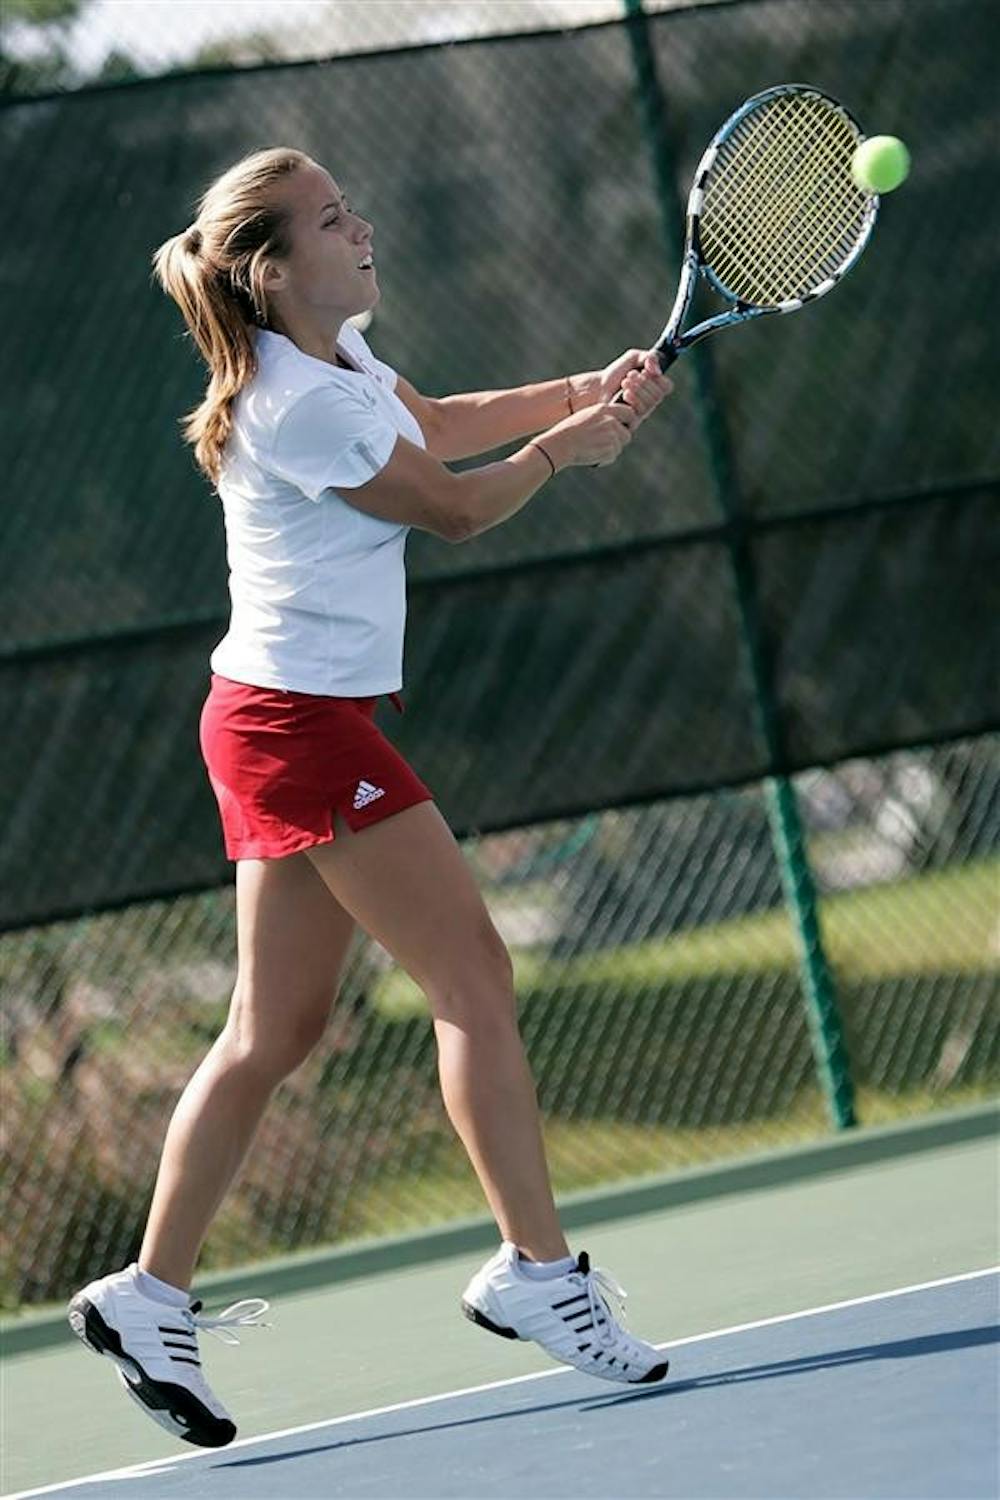 Senior Lindsey Stuckey hits a shot against Kansas State's Petra Chuda during the Hoosier Invitational on Saturday, Sept. 26 at the Varsity Tennis Courts. Stuckey prevailed 6-4, 6-1 while the Hoosiers dominated the event with an overall singles record of 19-4 while winning 12 of 15 doubles matches on the weekend. 